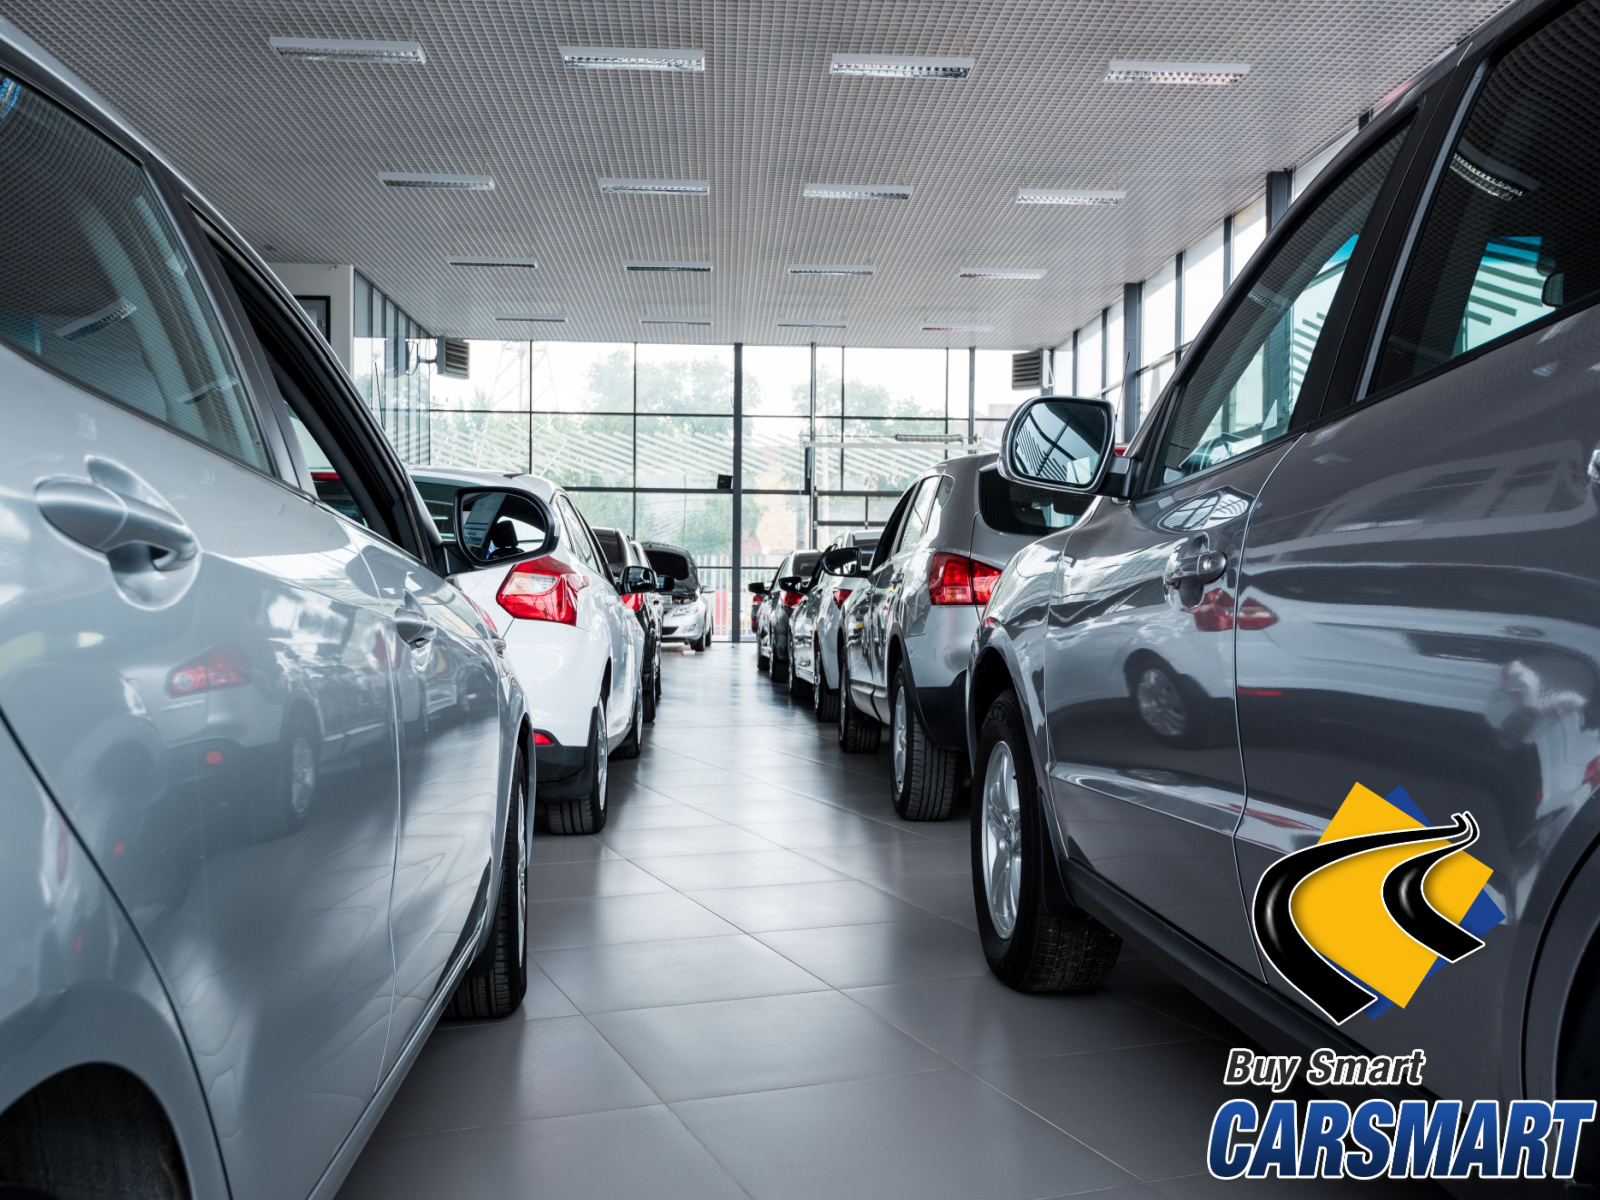 Is It Possible To Find The Best Car Dealership?